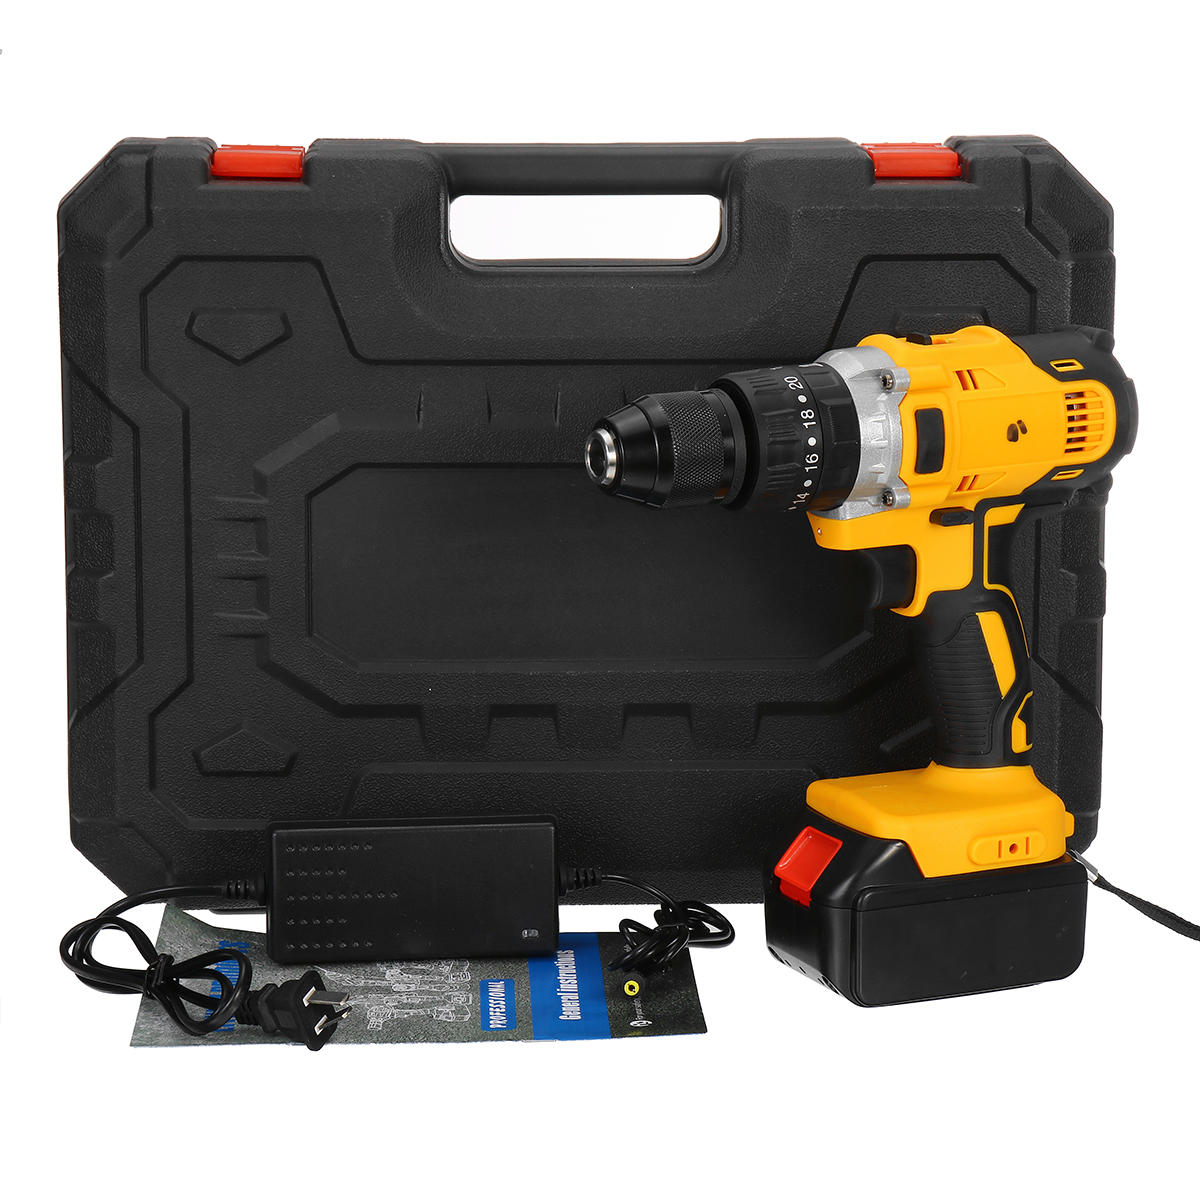 100 240V AC 36V 3 In 1 Cordless 150Nm Torque Impact Drill Screwdriver Wrench 2 Speeds Adjustment LED Lighting with Large